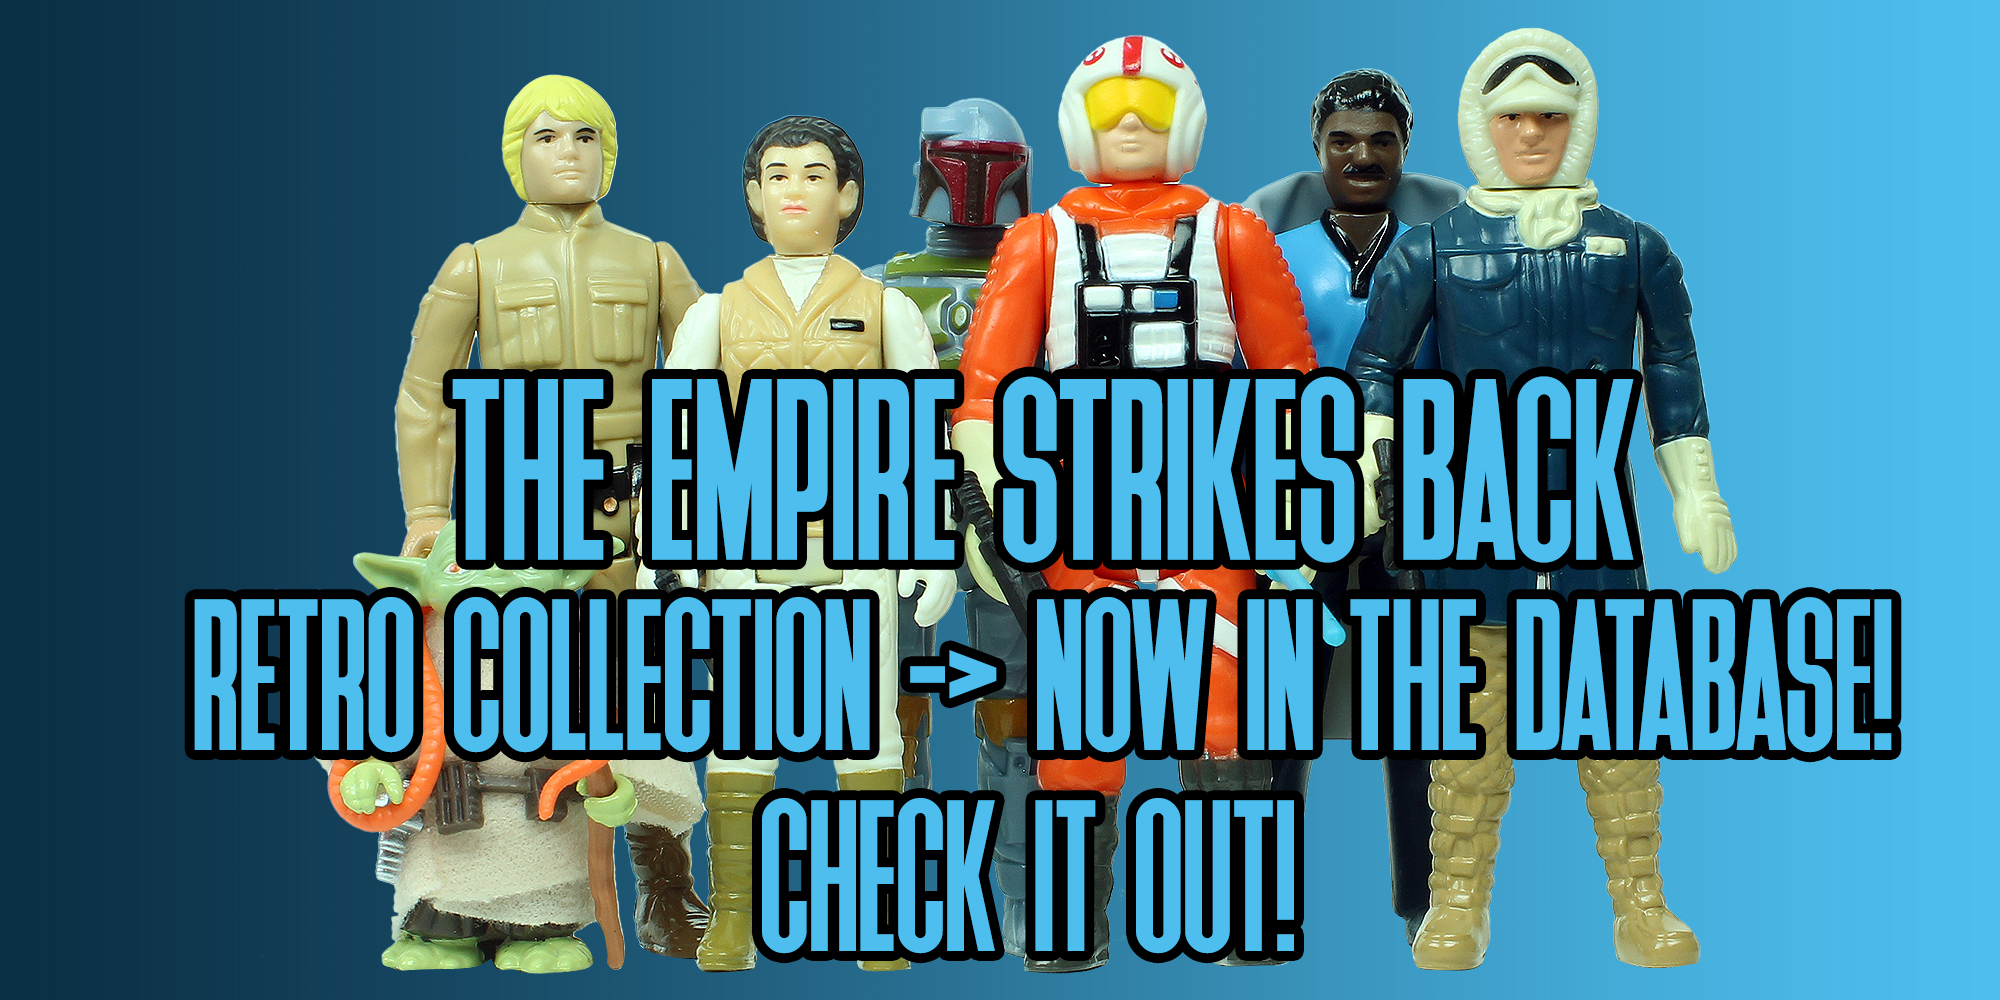 All ESB Retro Collection Figures Added!